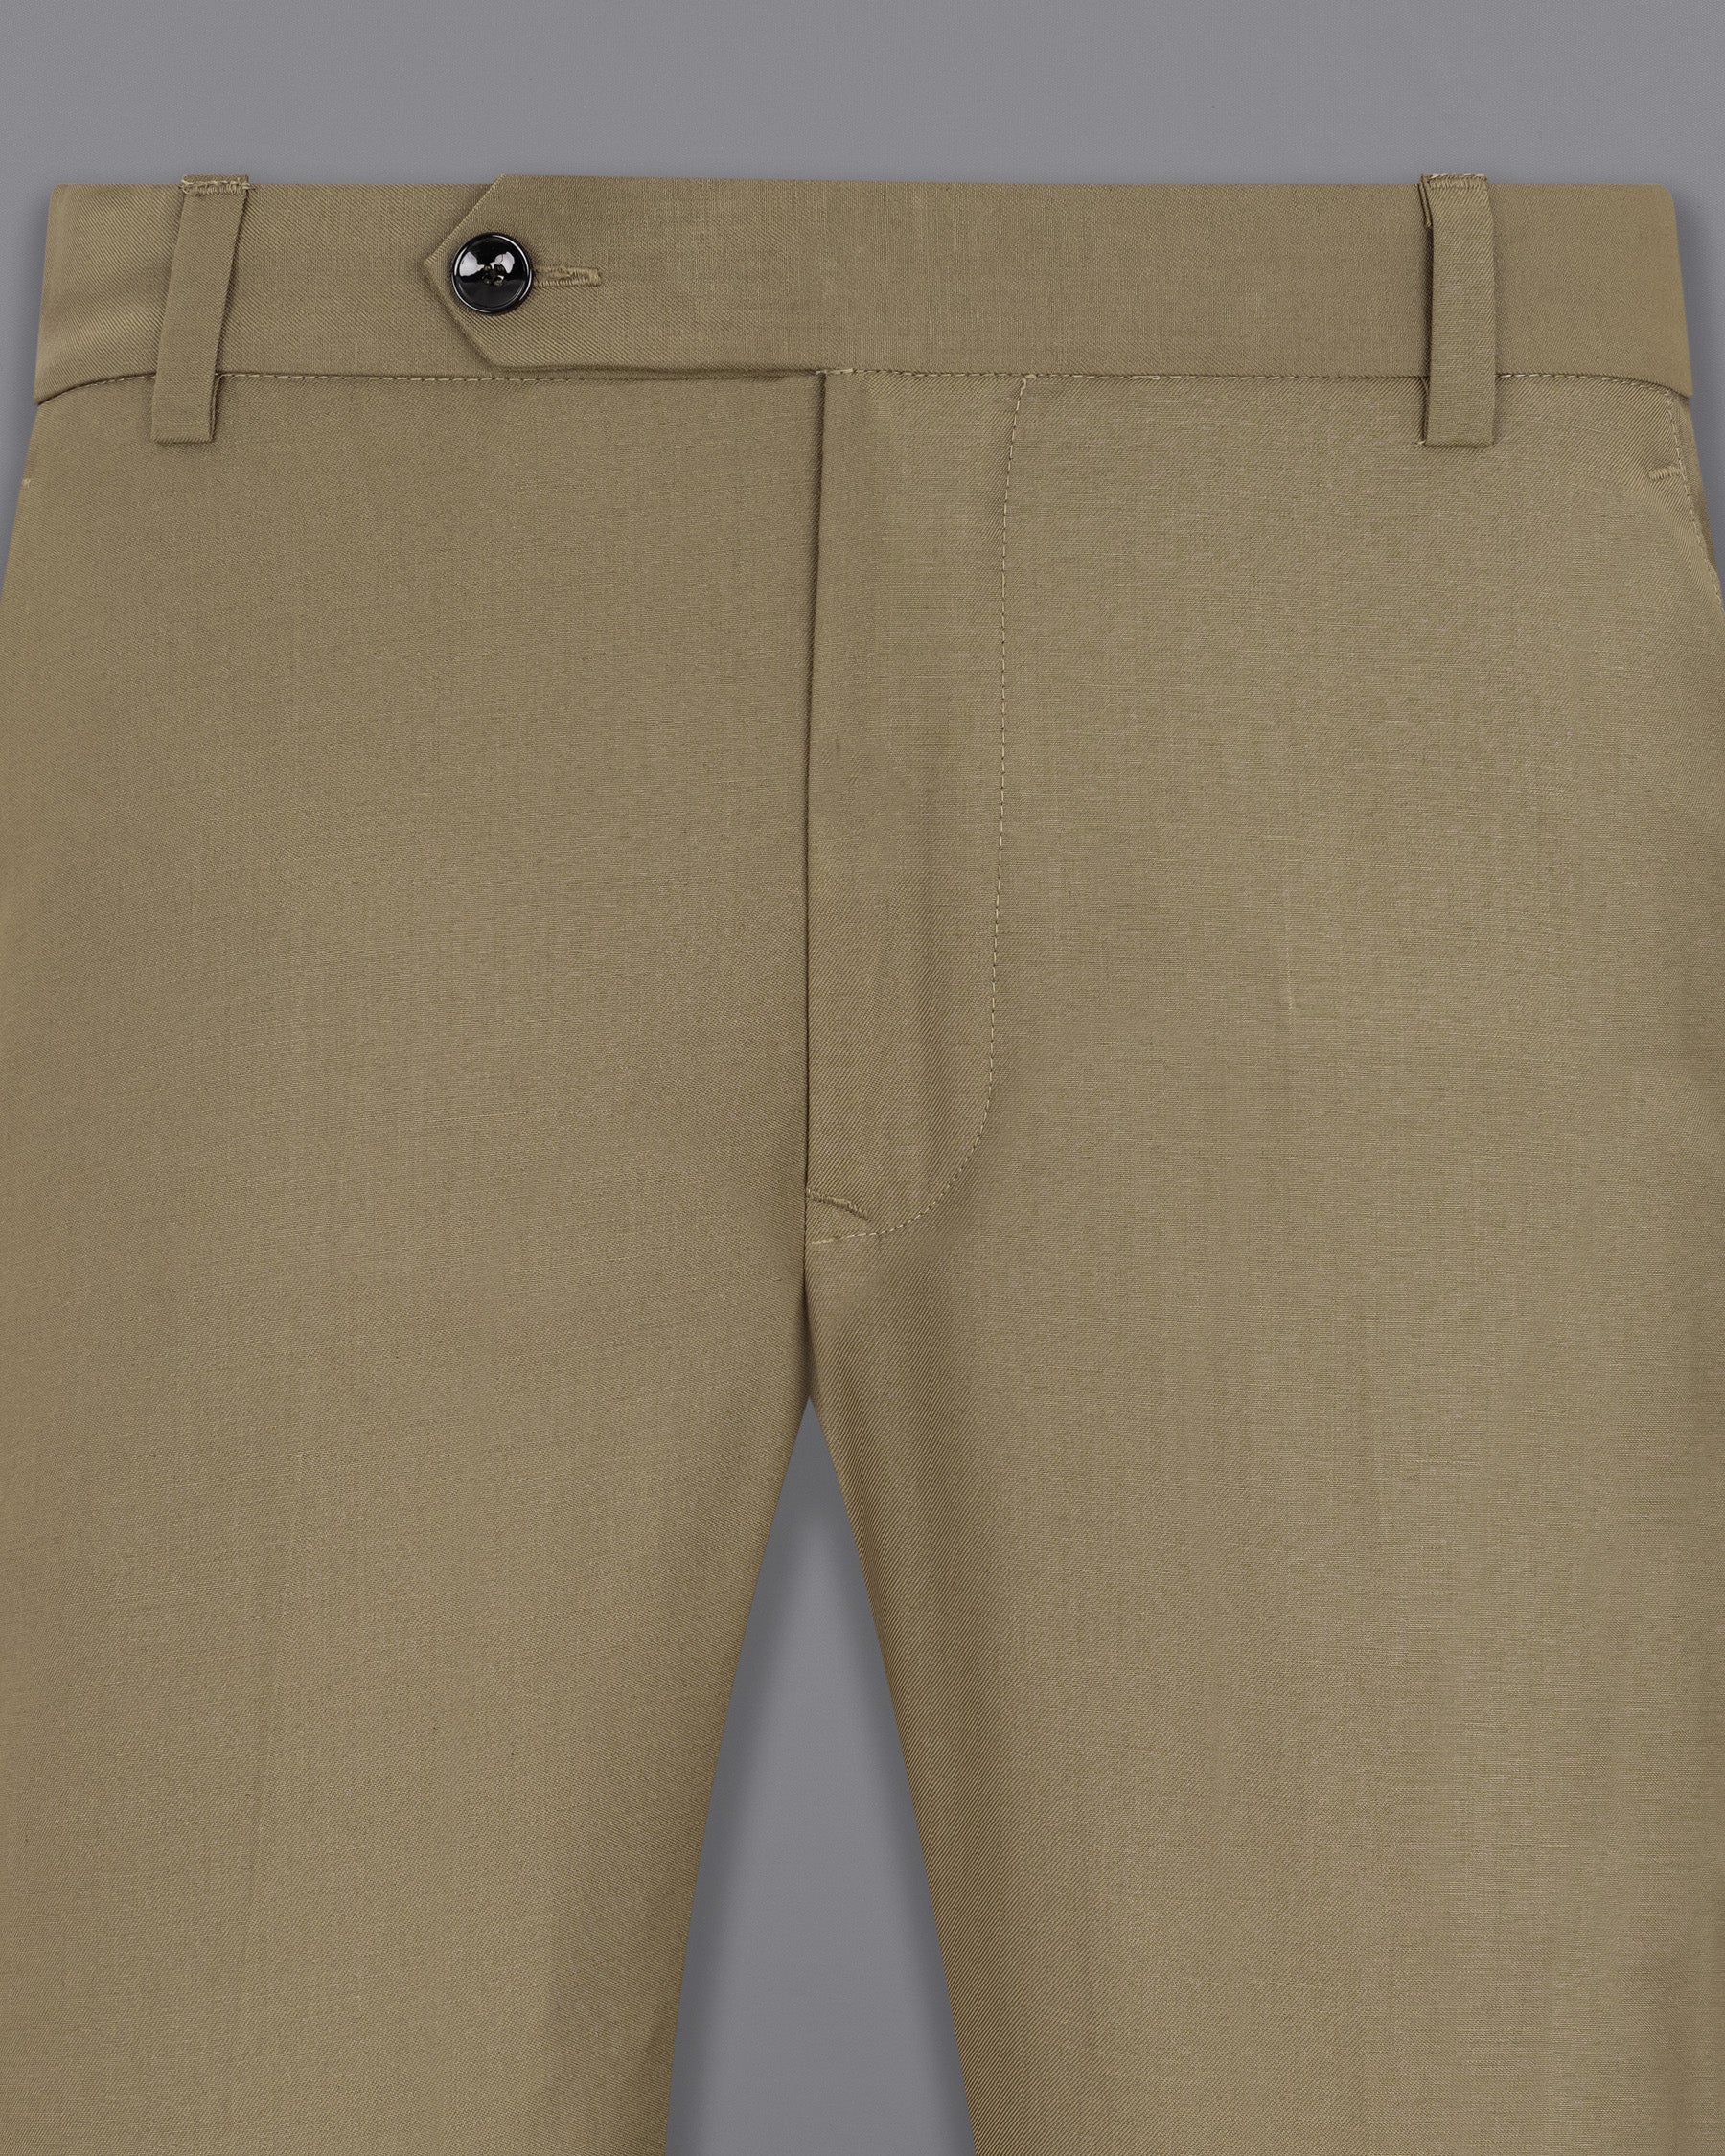 Shadow Brown Textured Pant T1974-28, T1974-30, T1974-32, T1974-34, T1974-36, T1974-38, T1974-40, T1974-42, T1974-44